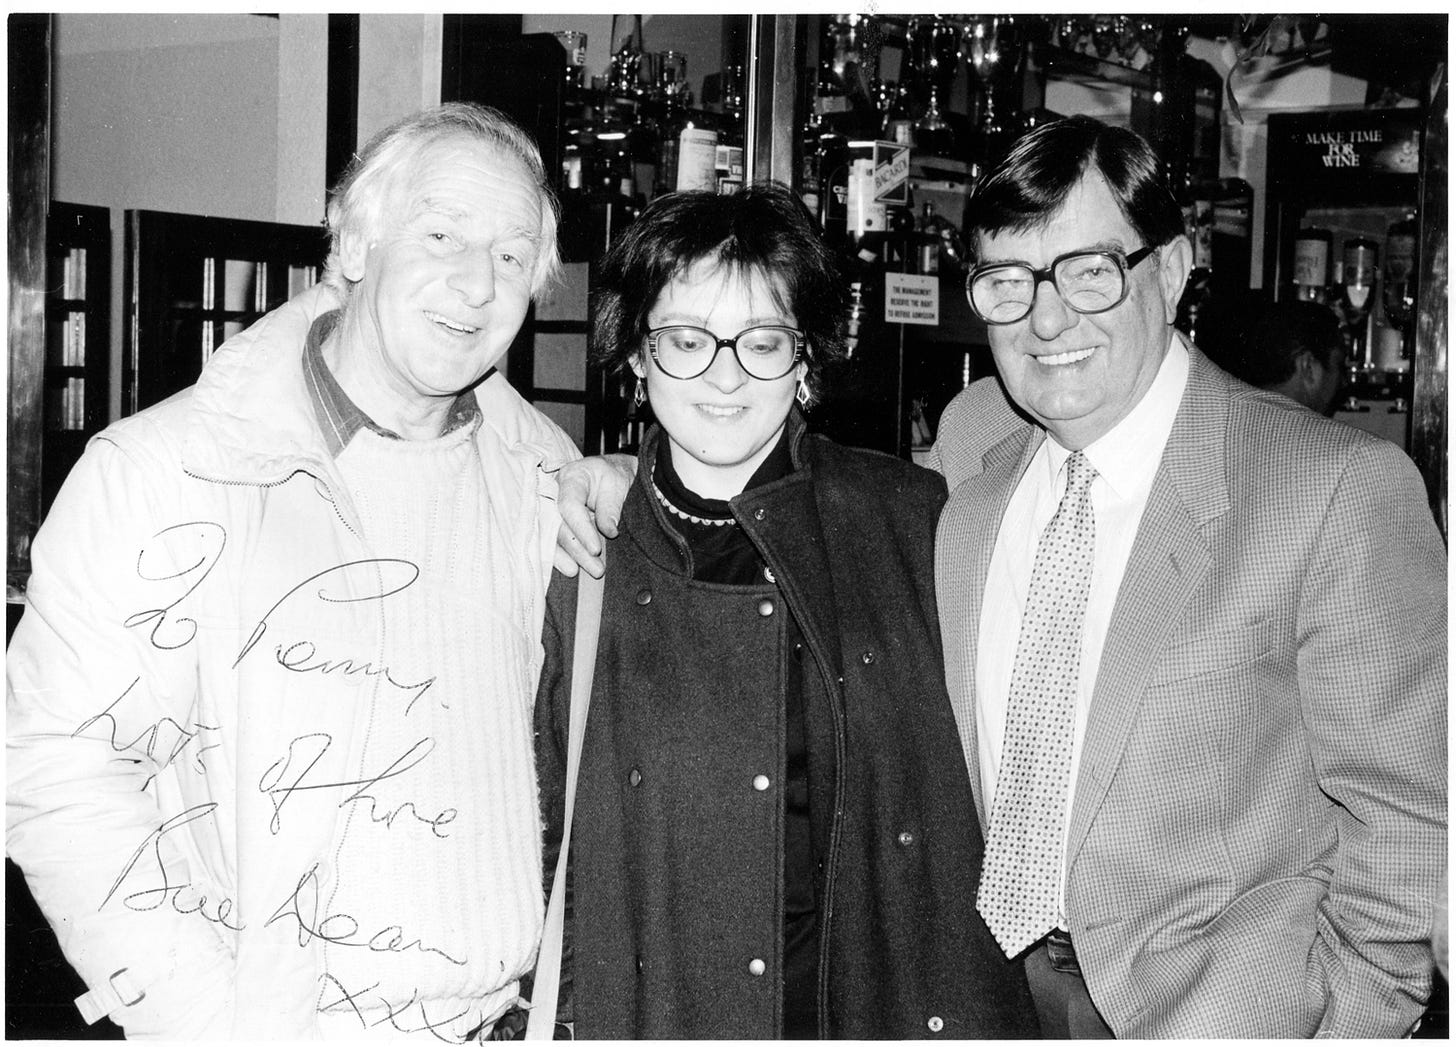 Black and white photo of a young woman, looking shy, standing between two men, looking cheerful. The photo is autographed with the words "To Penny, Lots of love, Bill Dean xxx".